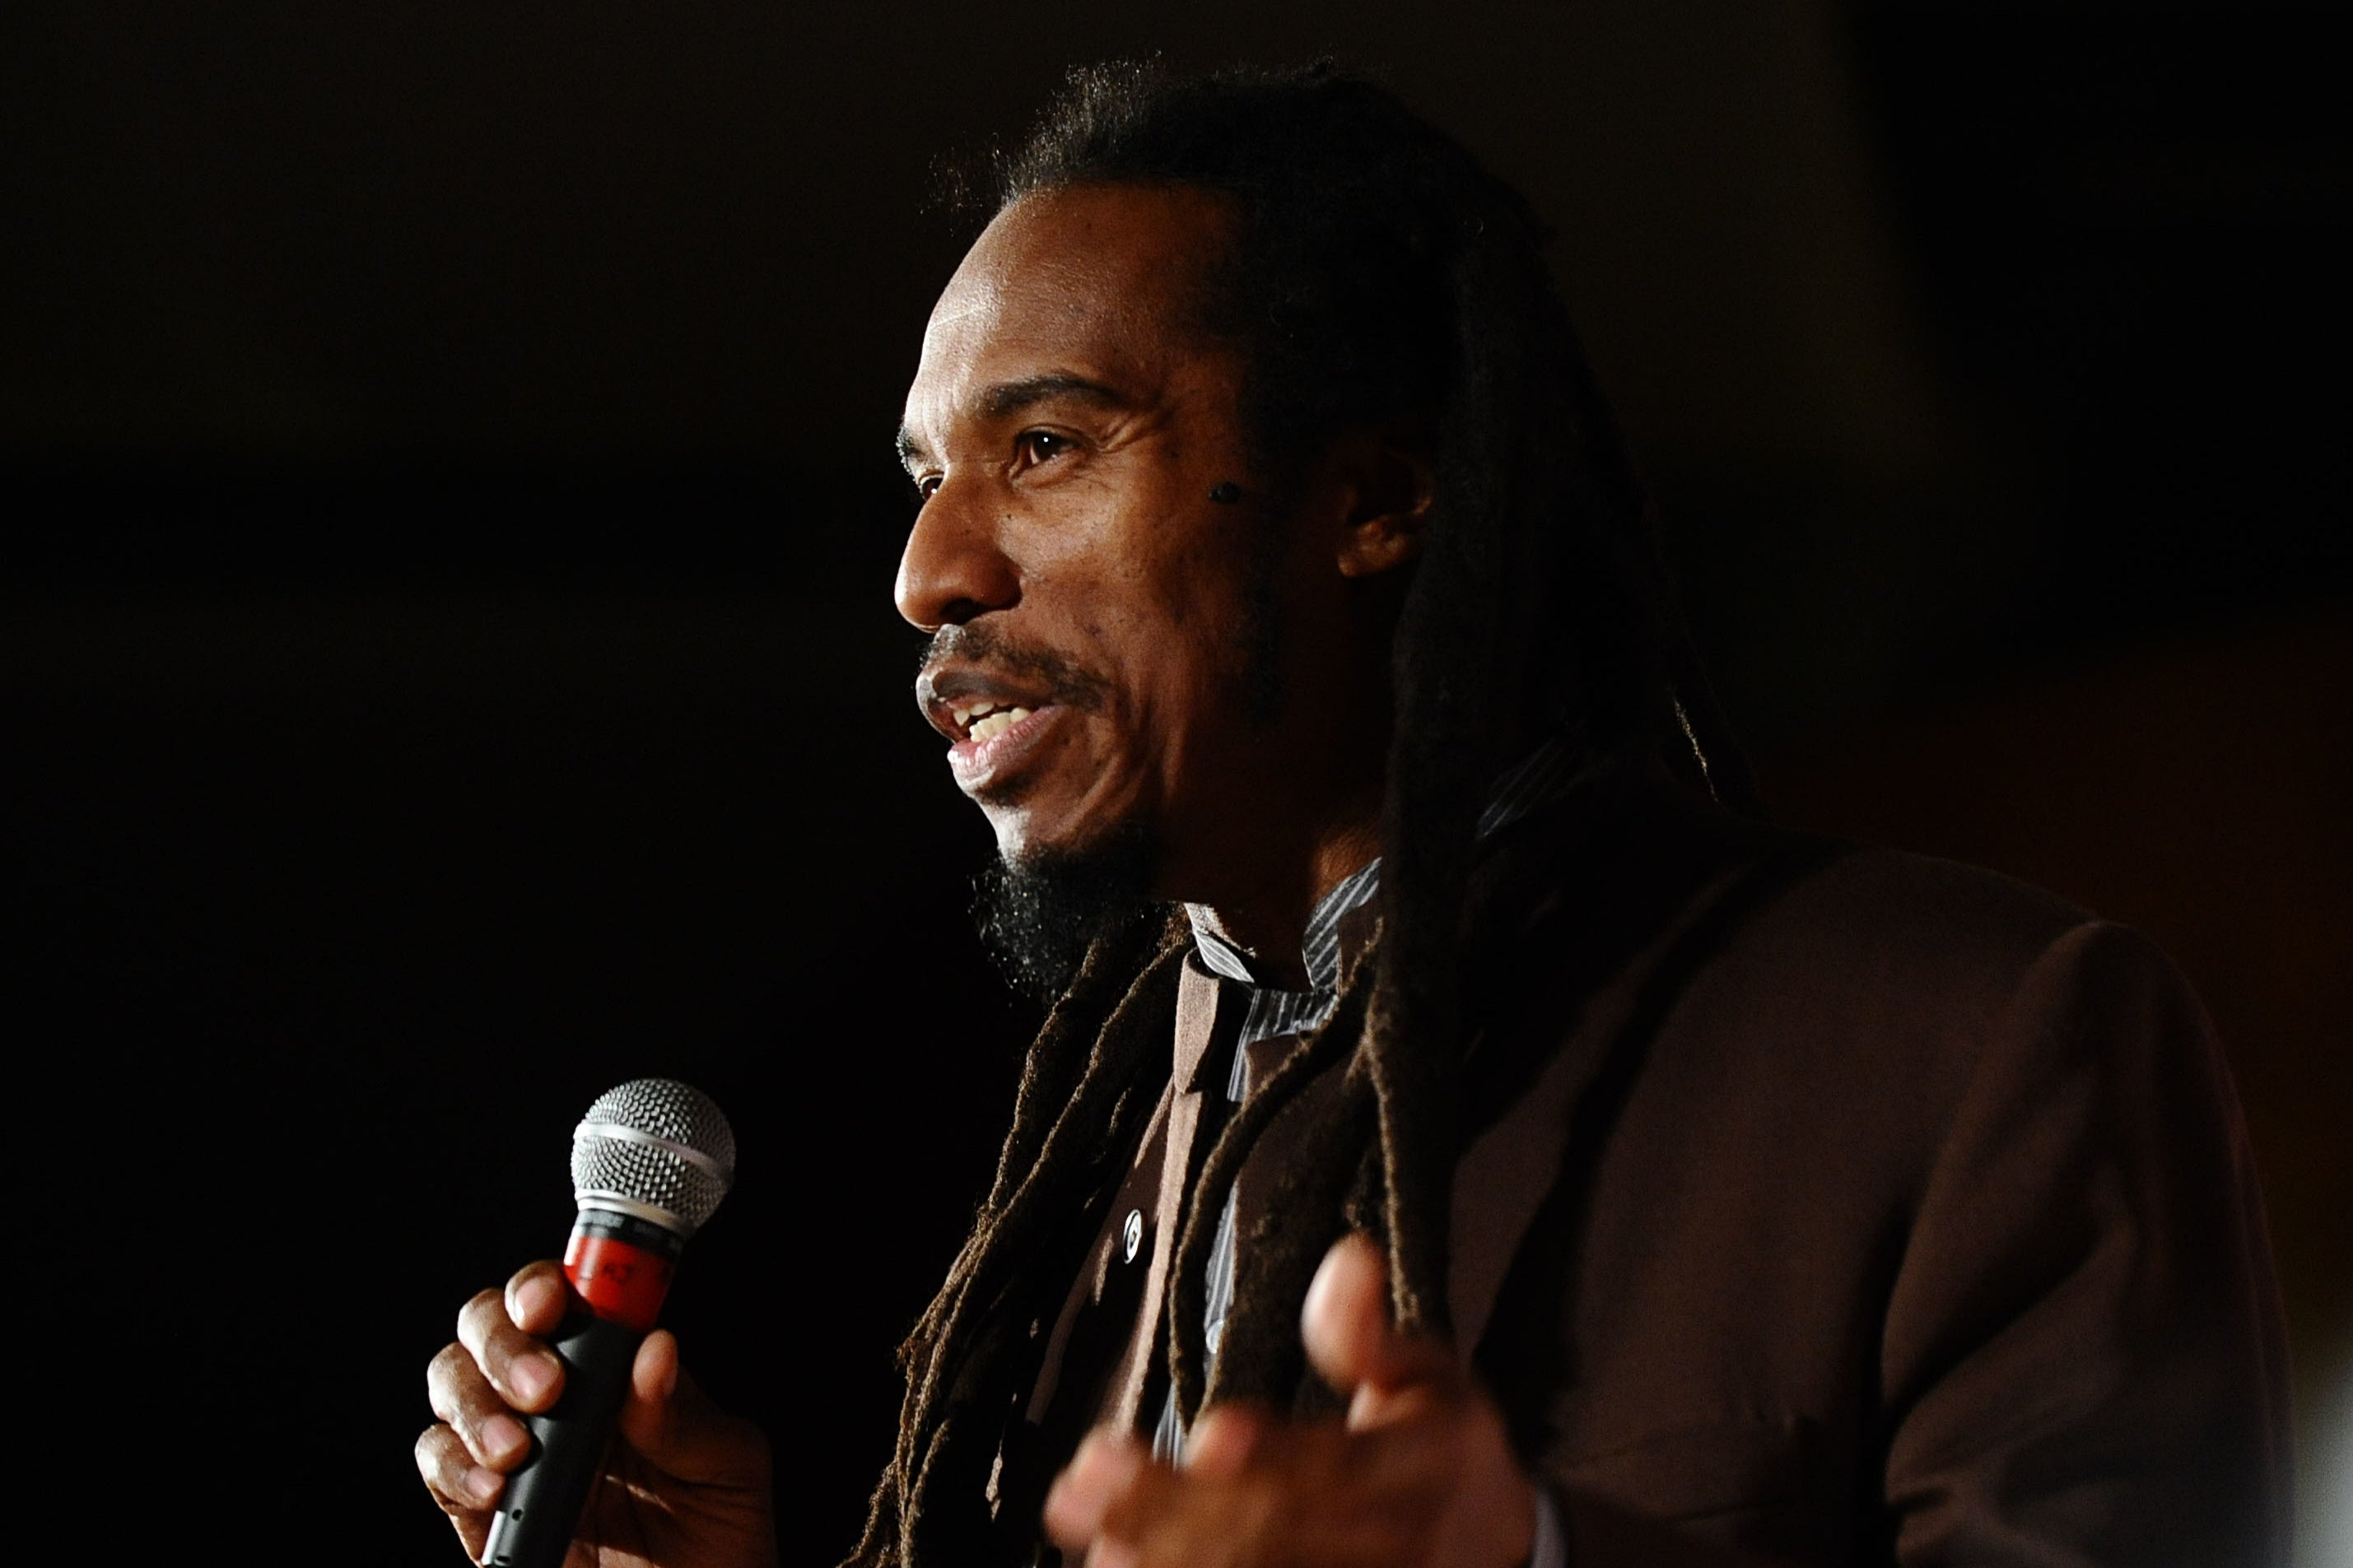 Benjamin Zephaniah speaks at the Concert For Haiti, sponsored by the TUC, at Congress House in London